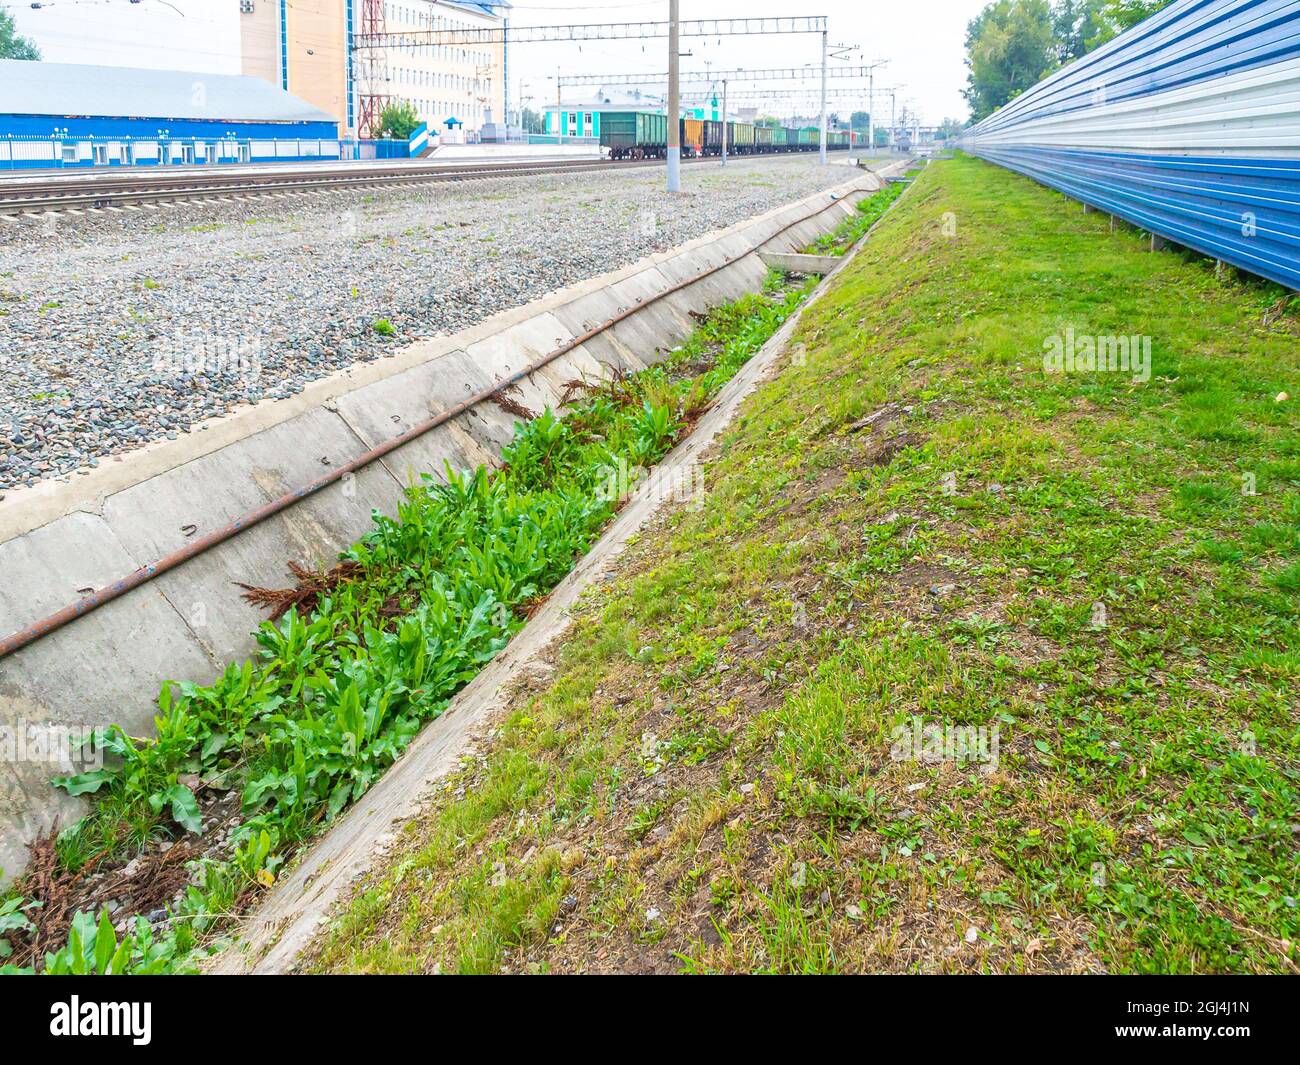 the drainage channel at the railway station has not been cleaned for a long time and it is overgrown with grass, selective focus Stock Photo